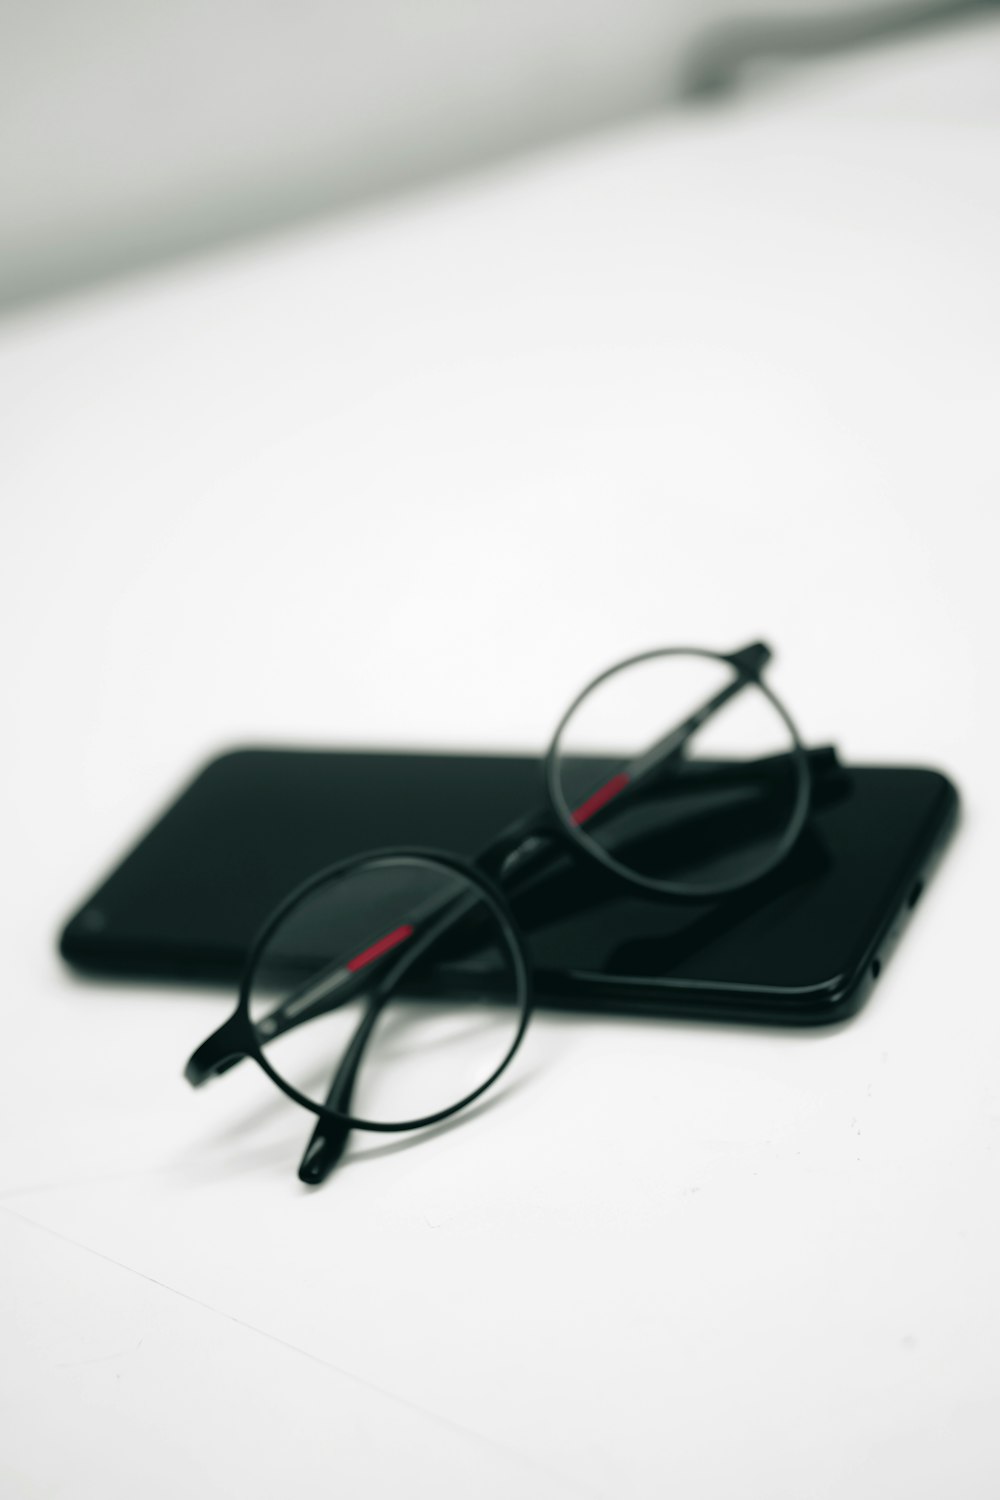 a pair of glasses sitting on top of a tablet